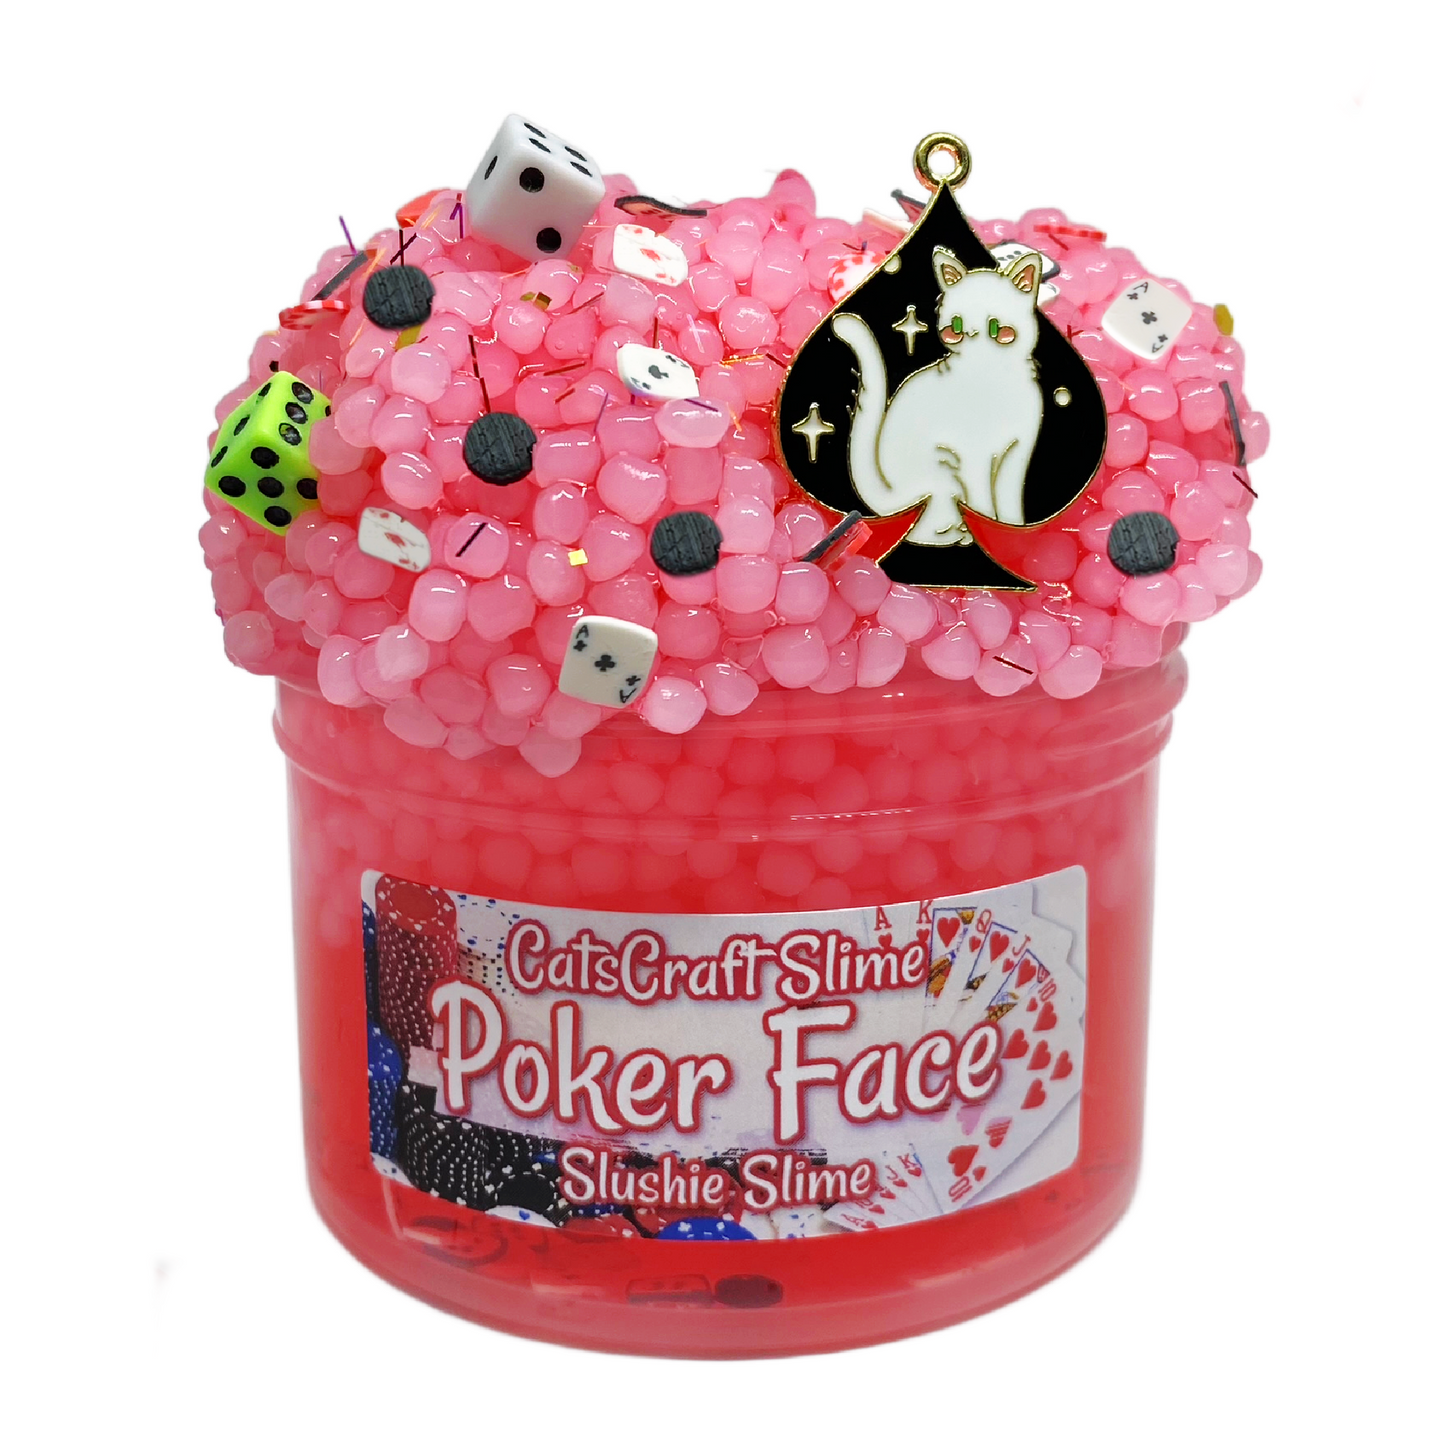 Slushie Slime "Poker Face" SCENTED red crystal clear slushee bead crunchy ASMR with cat charm